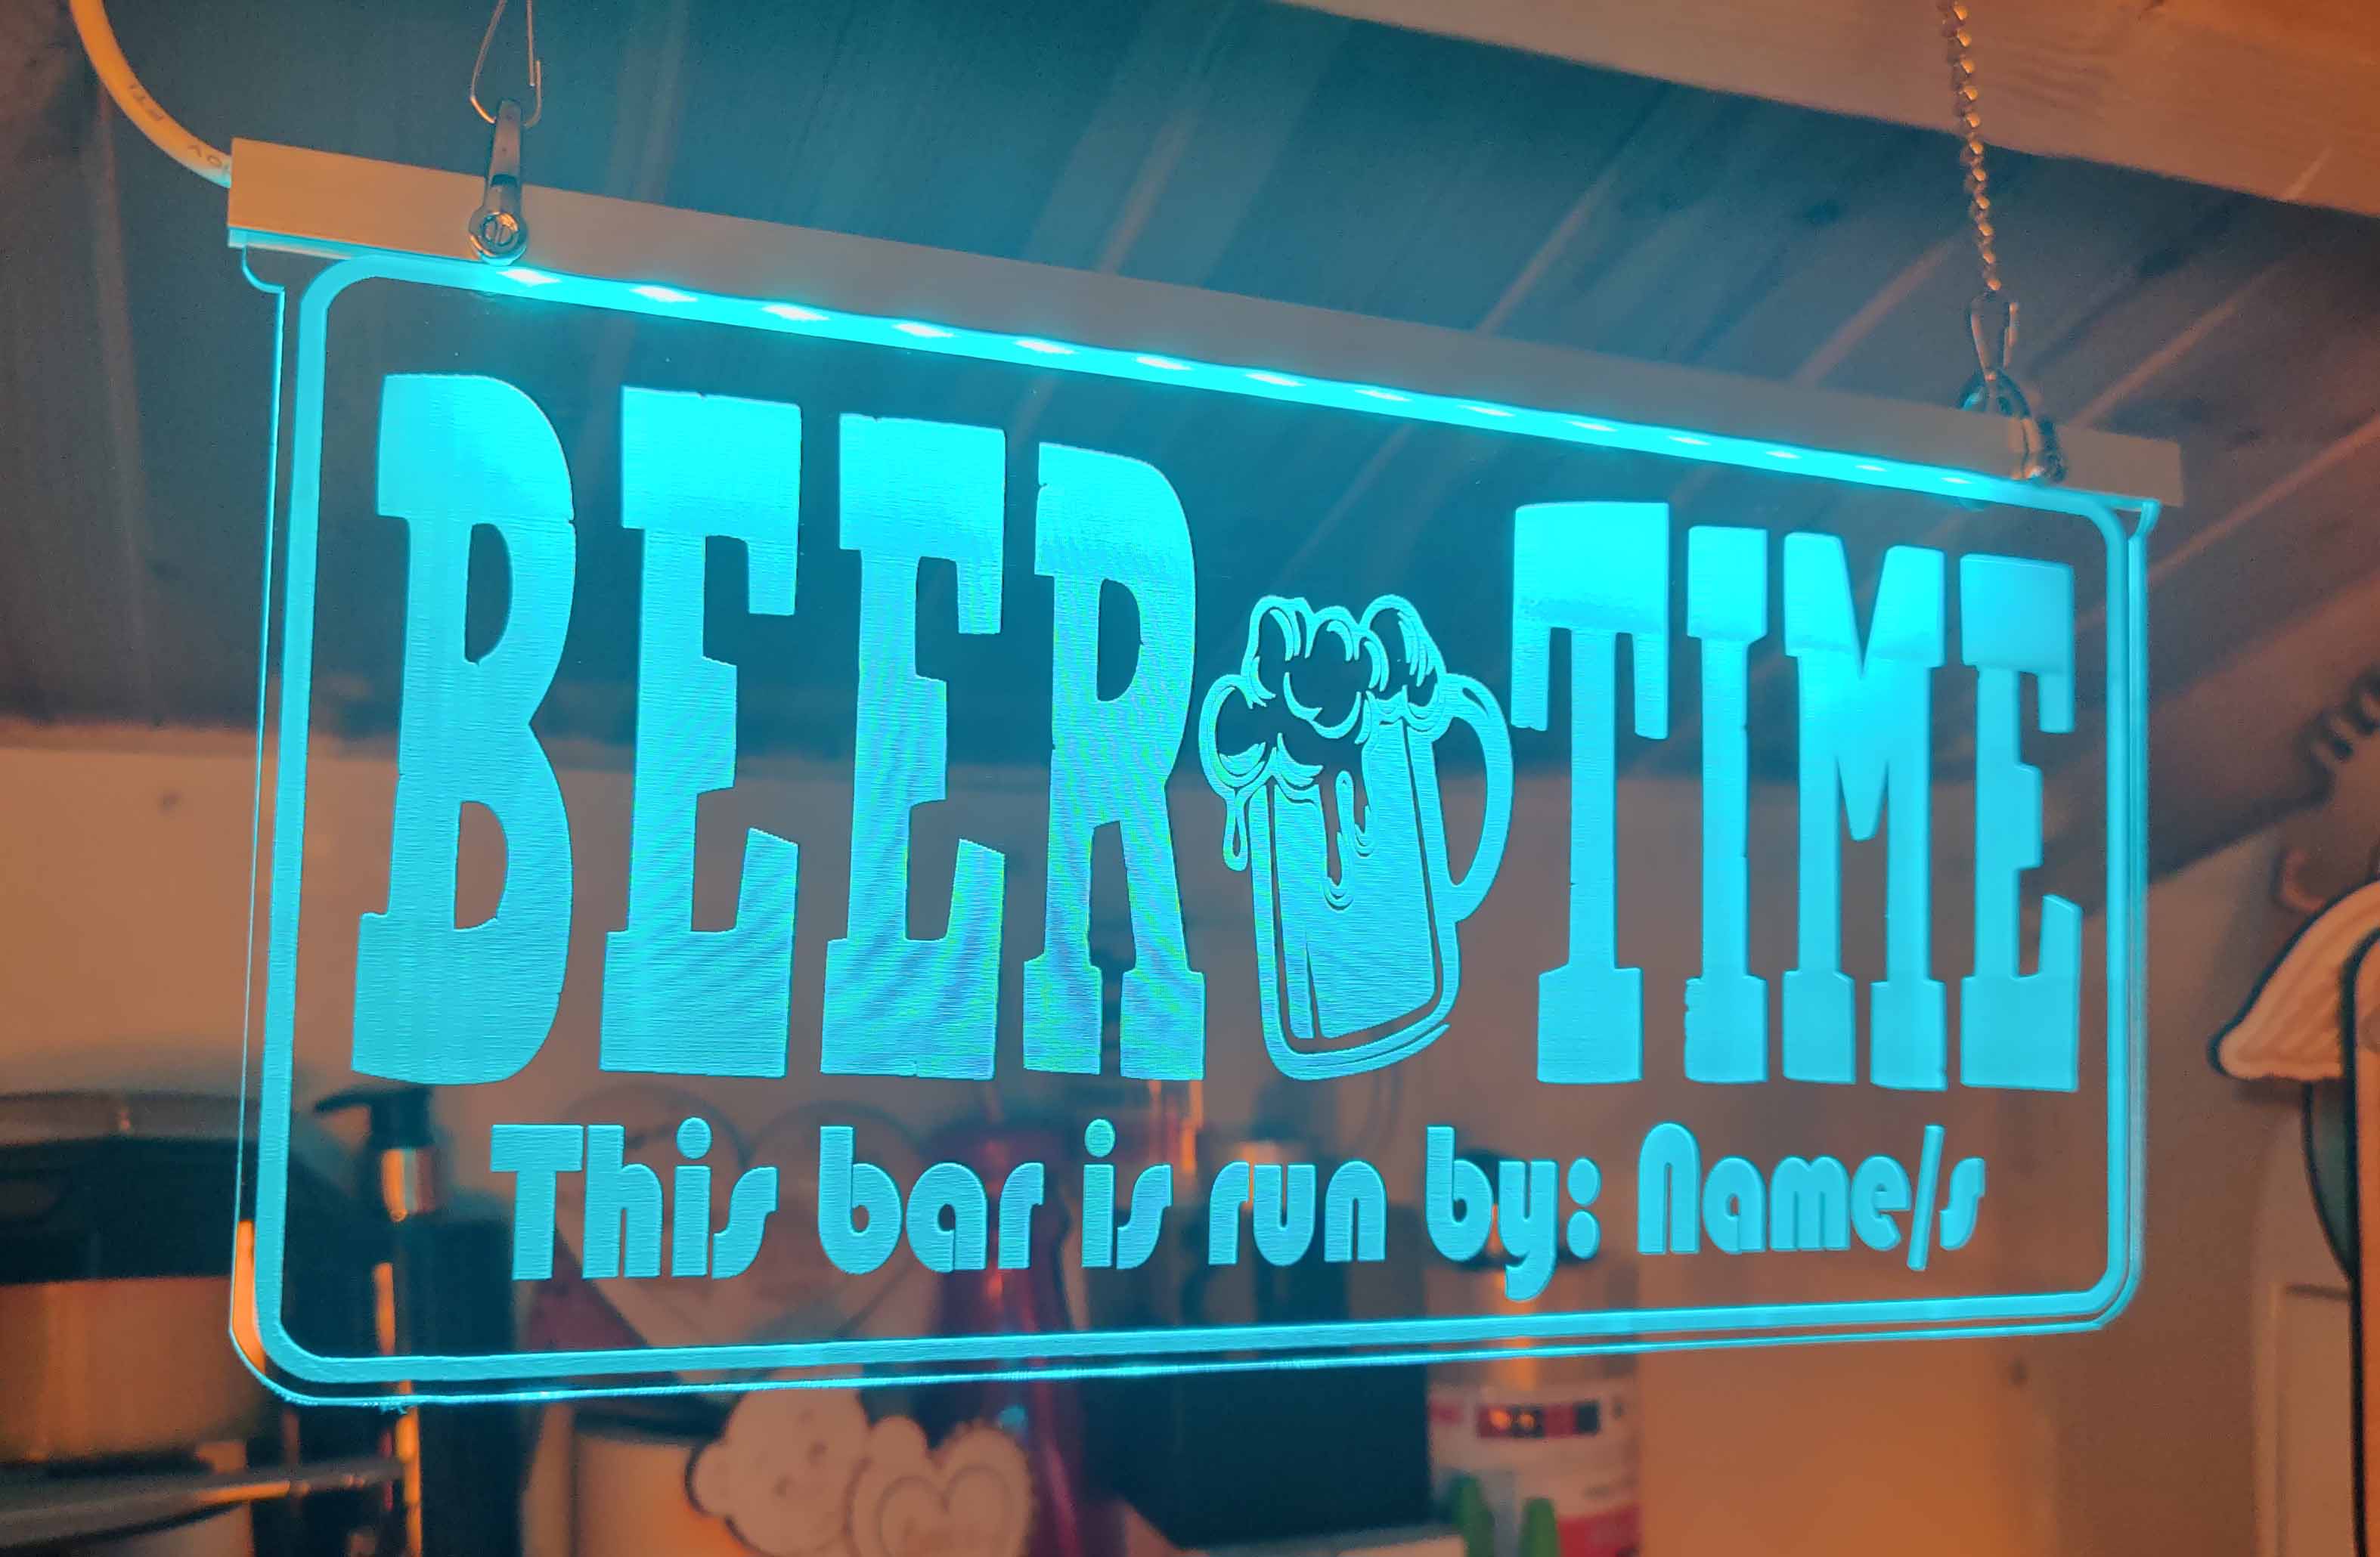 beer time led sign with personalised bar owners name engraved